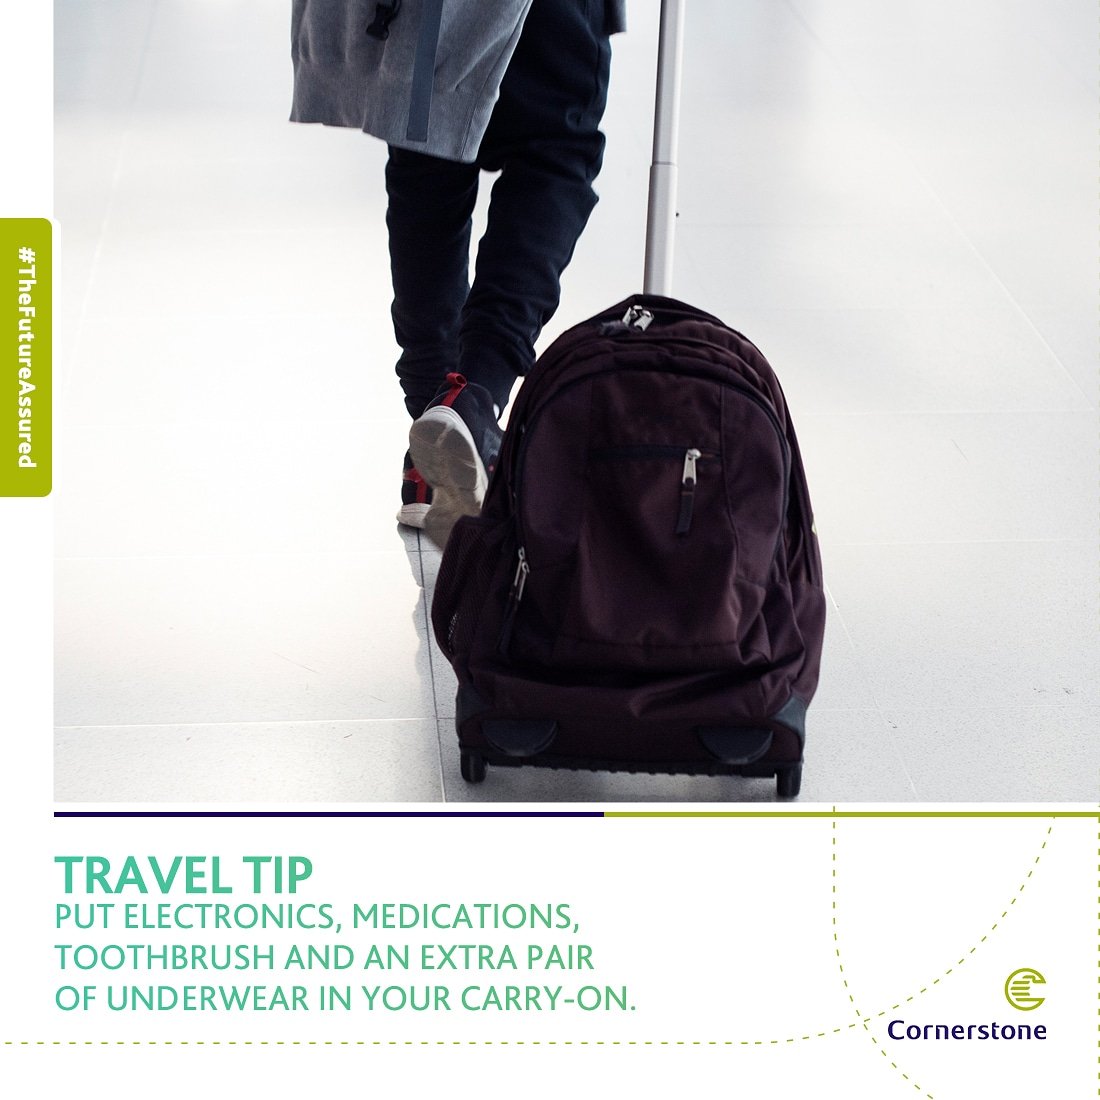 #TravelTipThursday

Always put electronics, medications,  toothbrush and an extra pair of underwear in your carry on.  

#TheFutureAssured